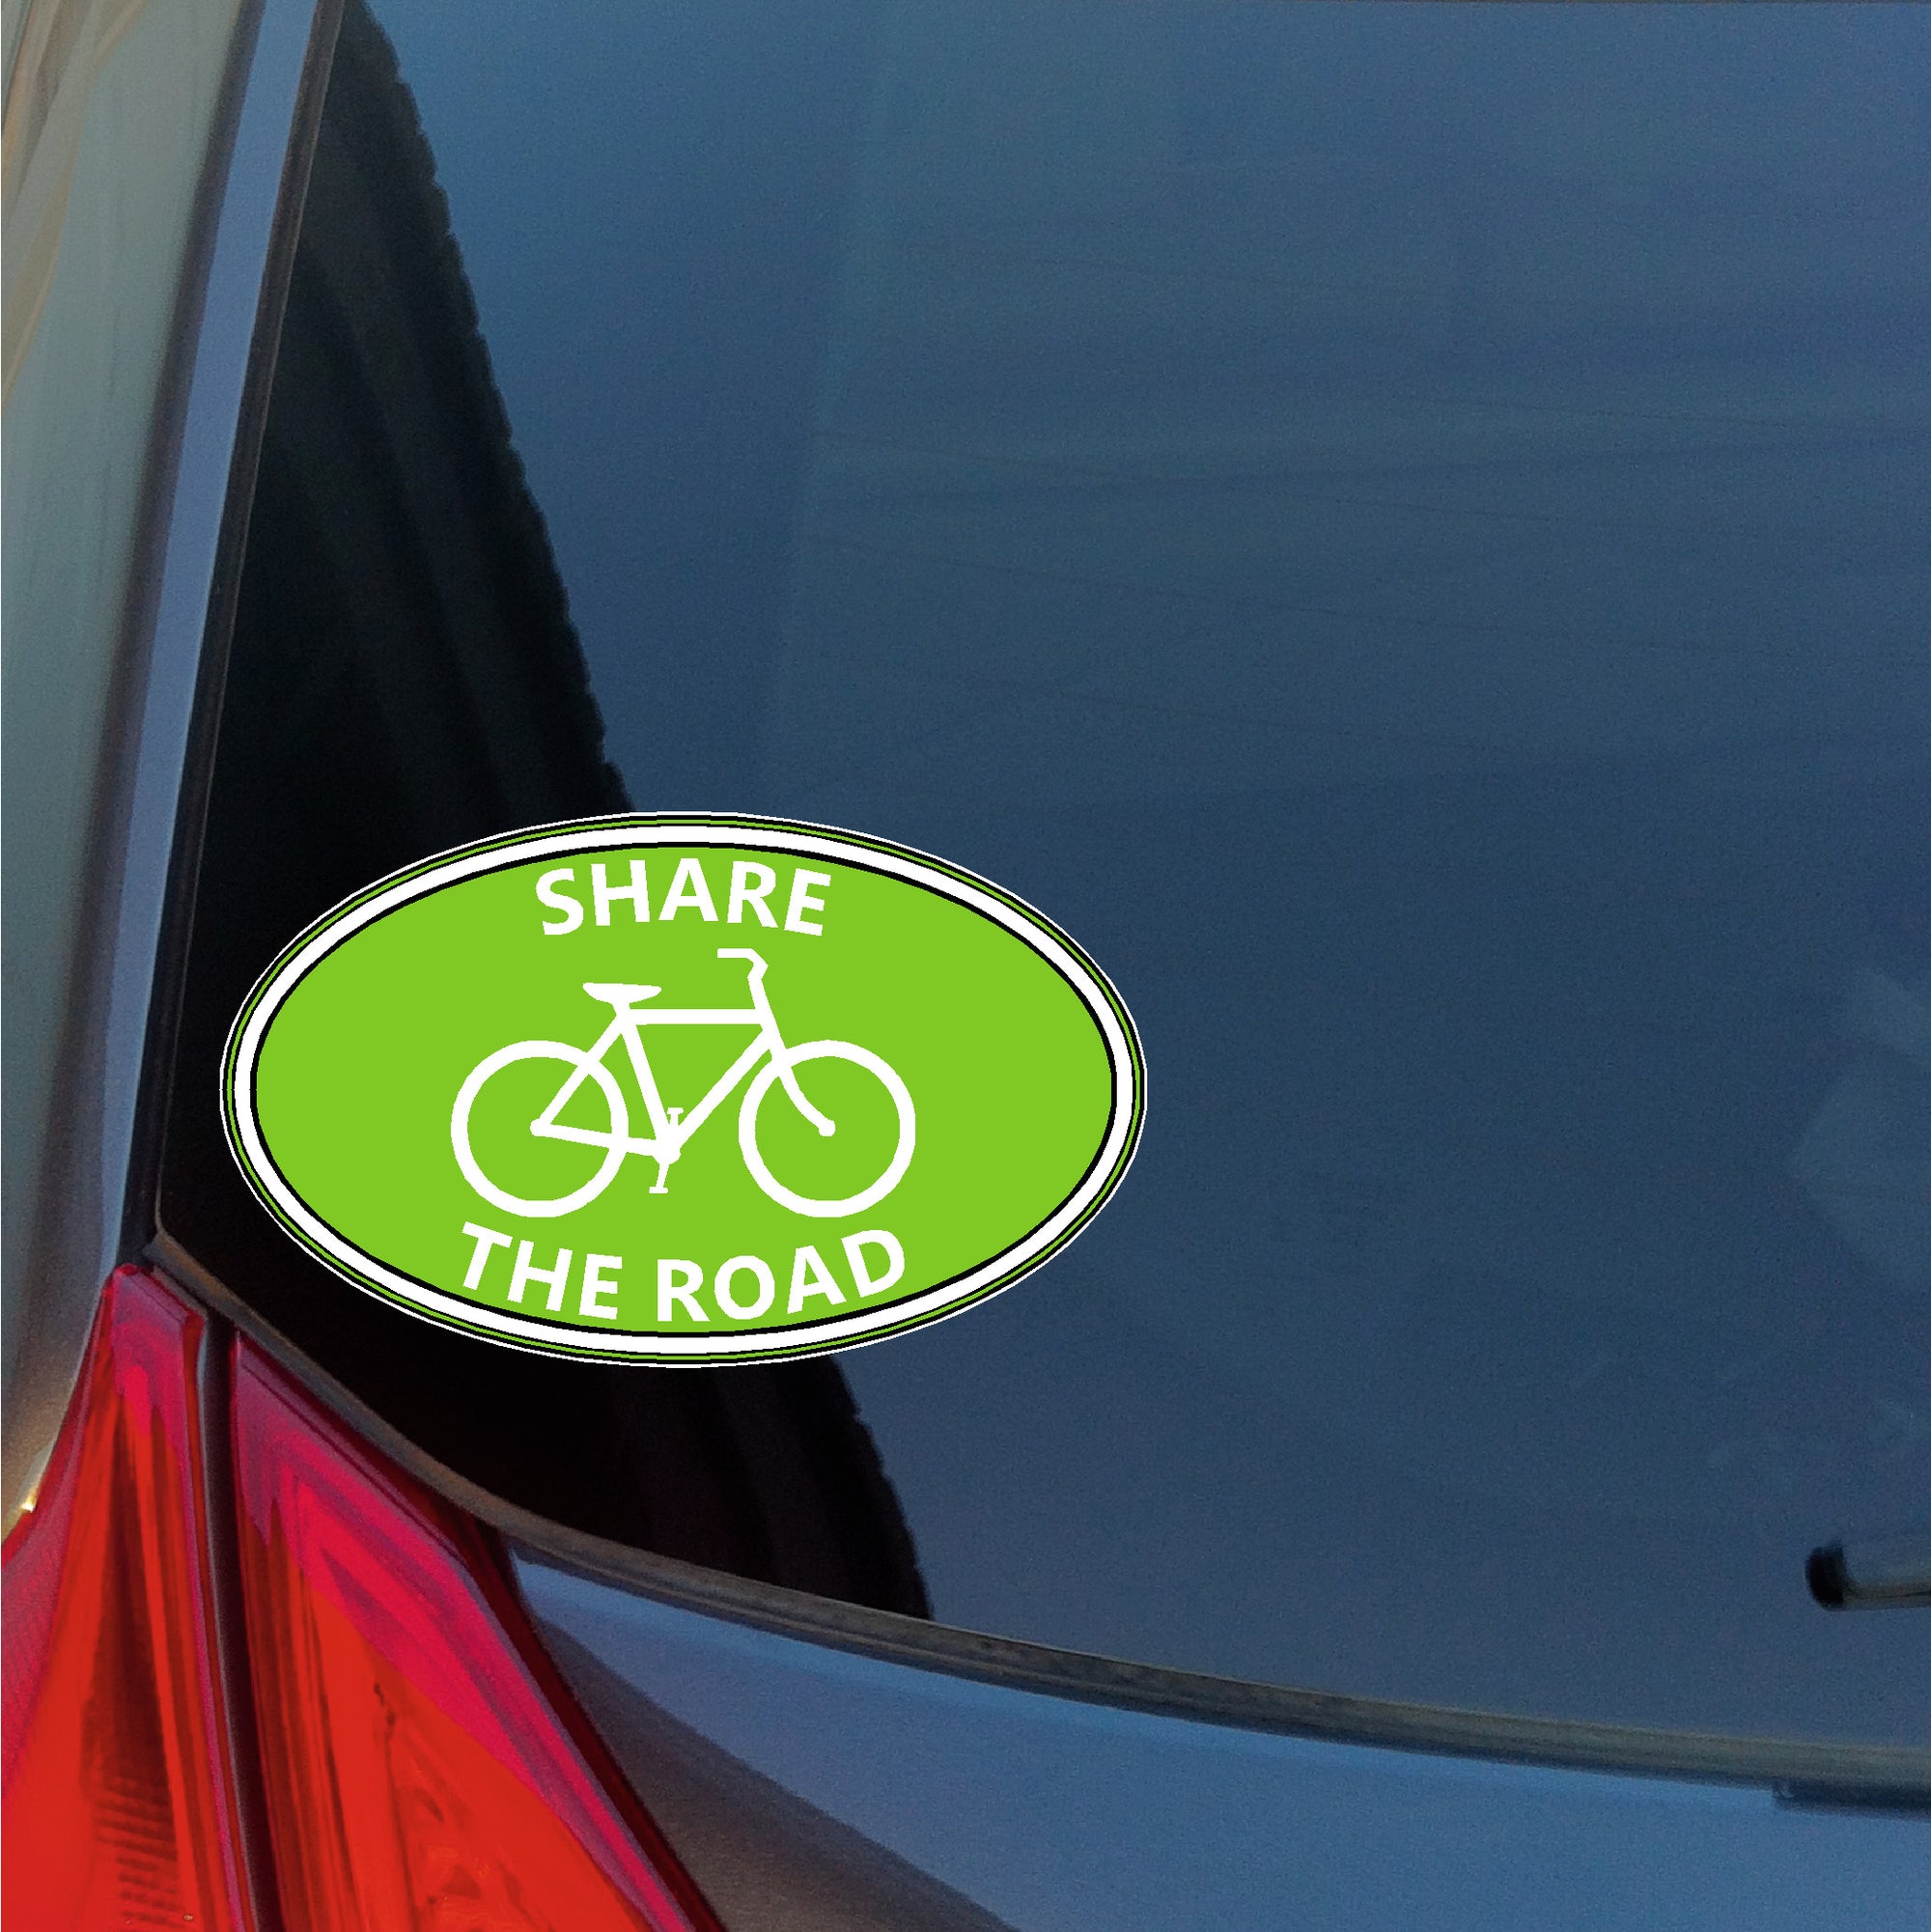 Share The Road bicycle oval sticker with green bike lane background